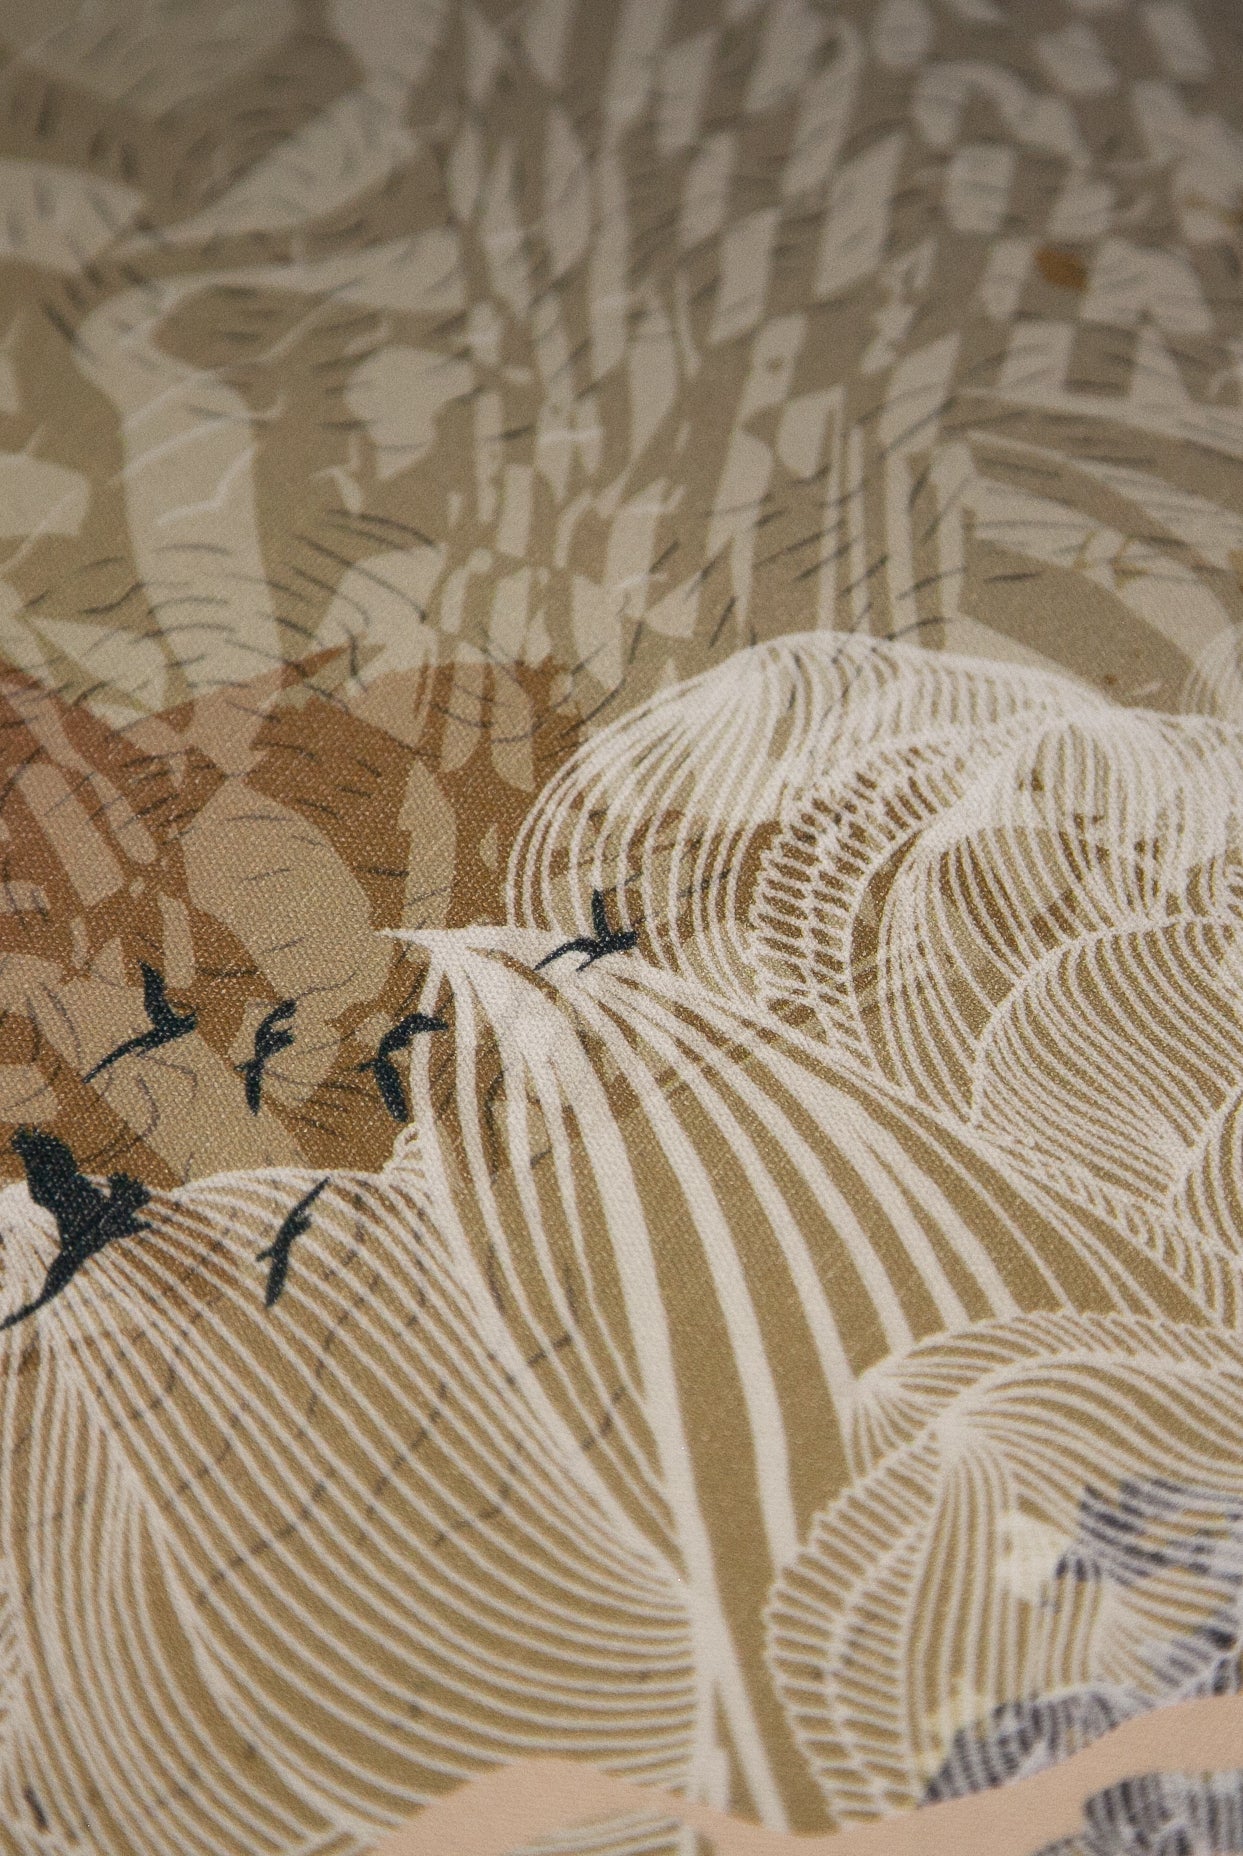 A close up of a Mural Wallpaper showing the linen texture 